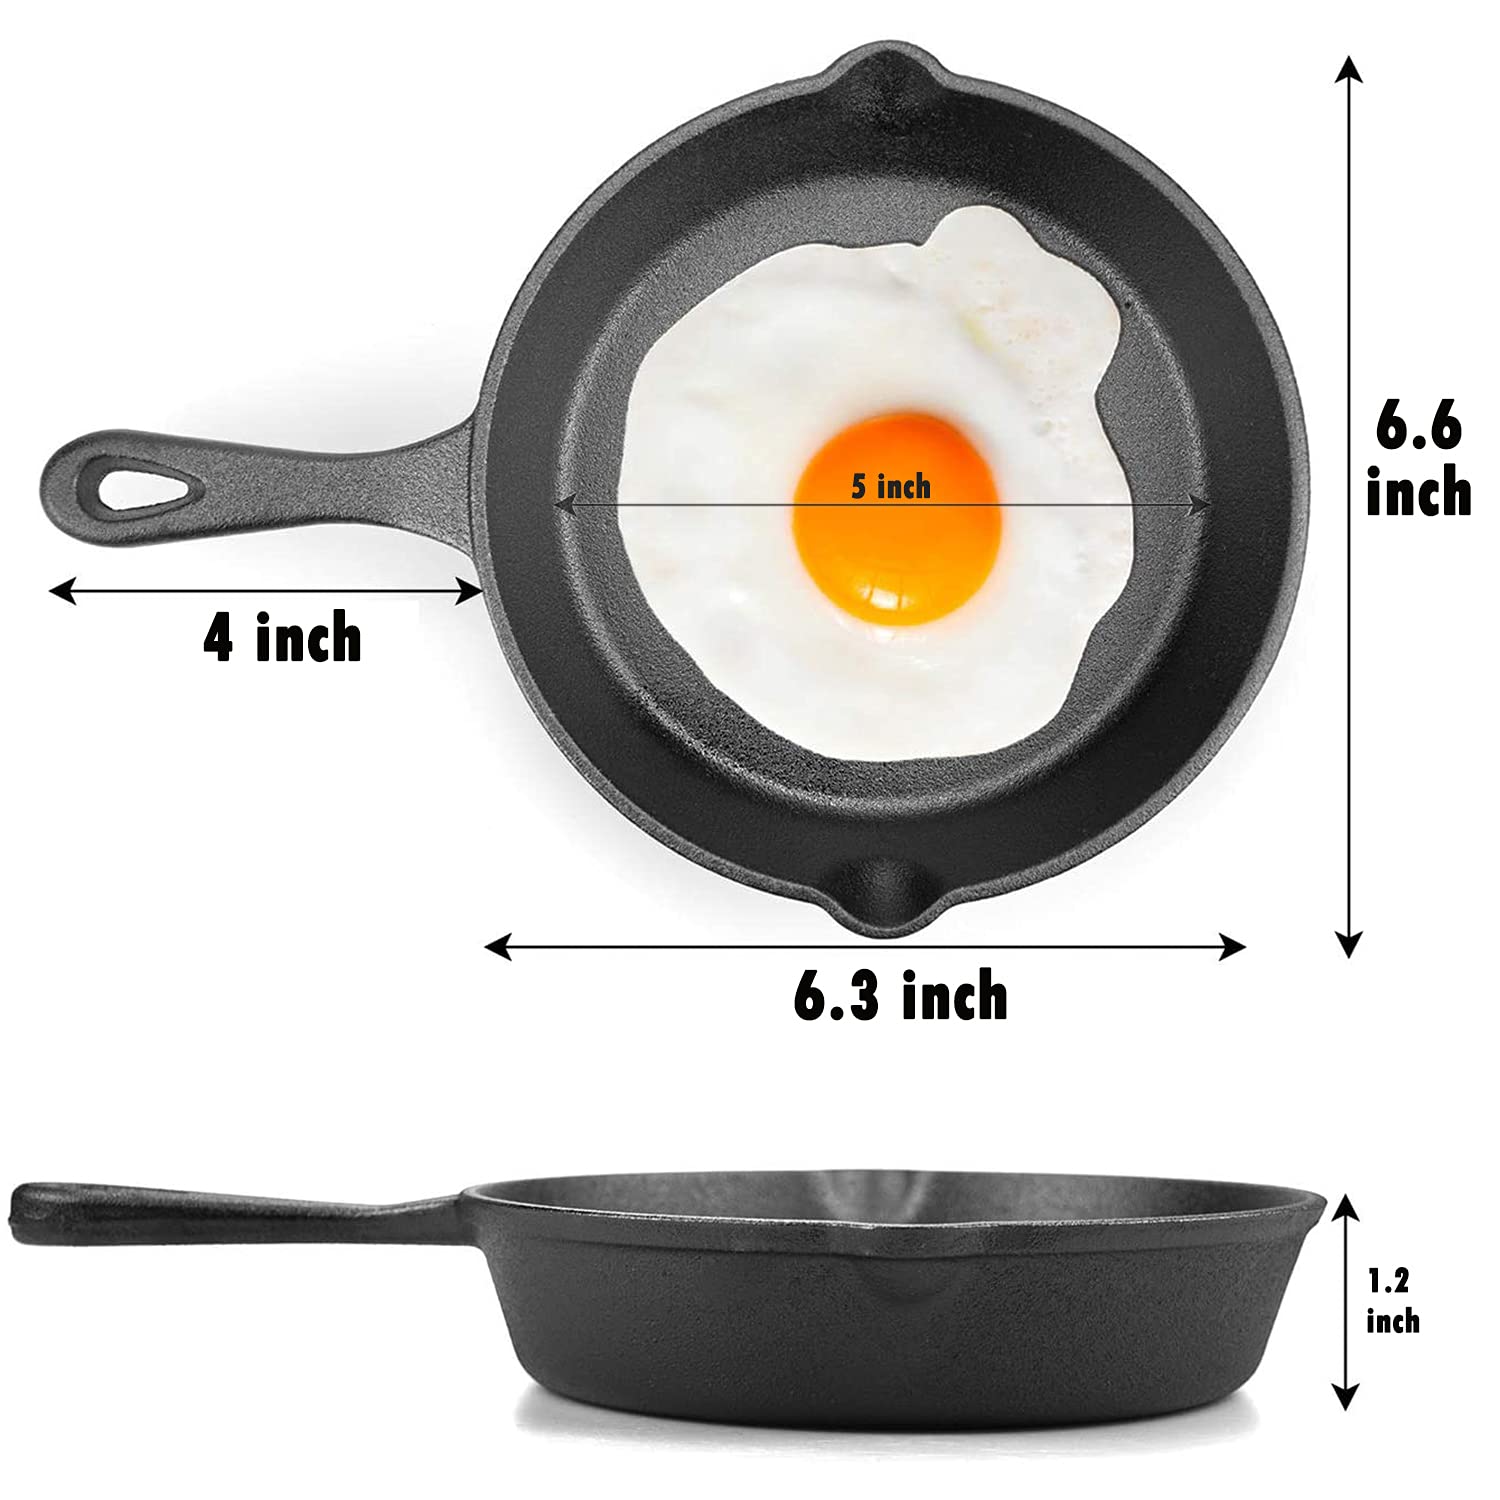 MOZUVE 6 Inch Cast Iron Skillet, Frying Pan with Drip-Spouts, Pre-seasoned Oven Safe Cookware, Camping Indoor and Outdoor Cooking, Grill Safe, Restaurant Chef Quality